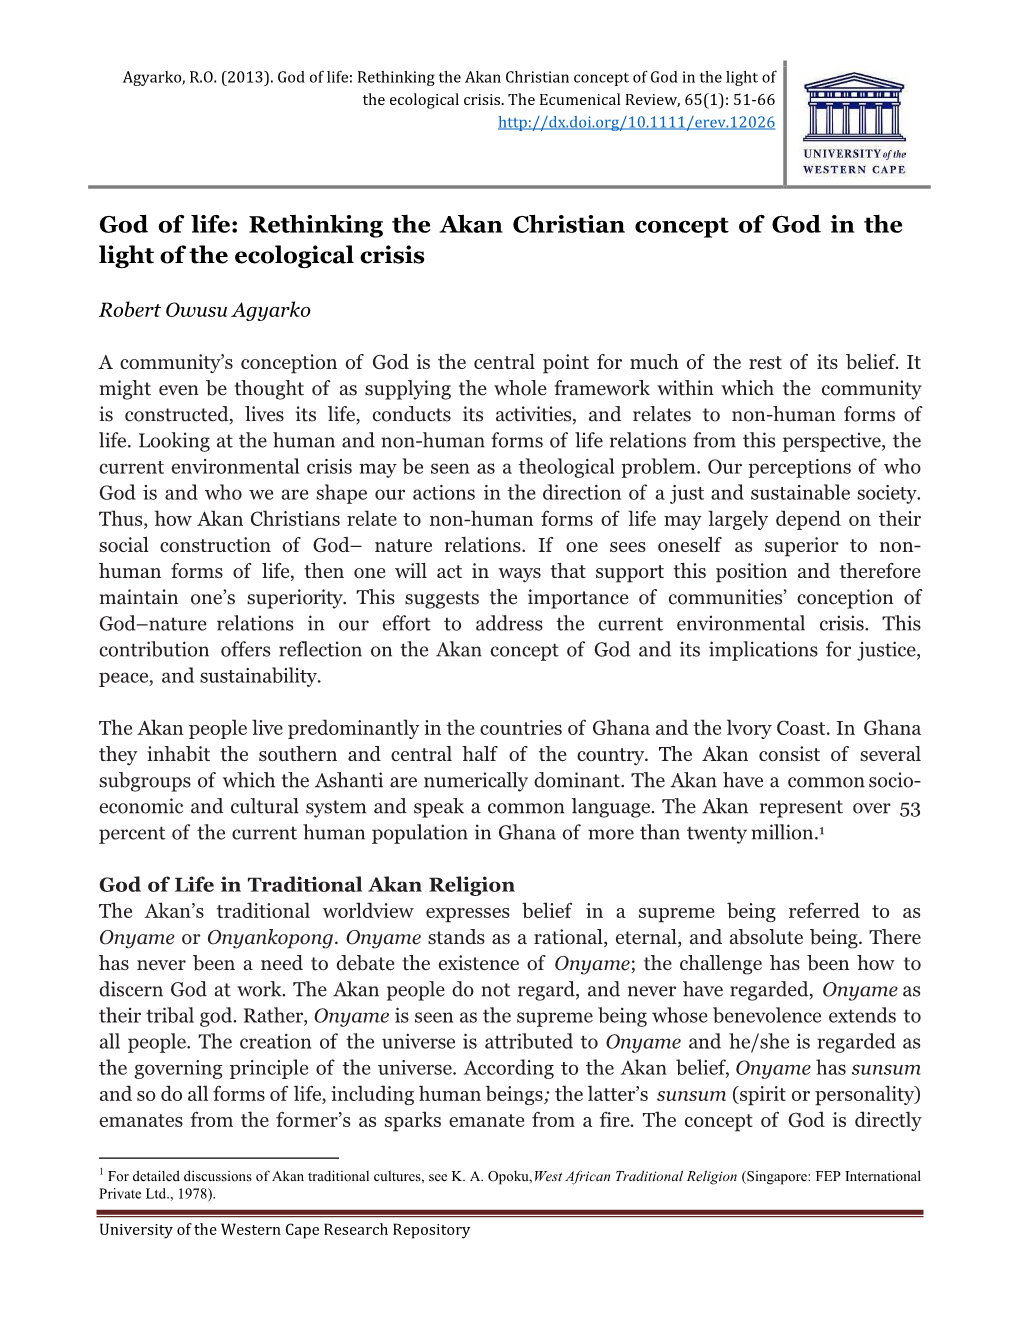 God of Life: Rethinking the Akan Christian Concept of God in the Light of the Ecological Crisis